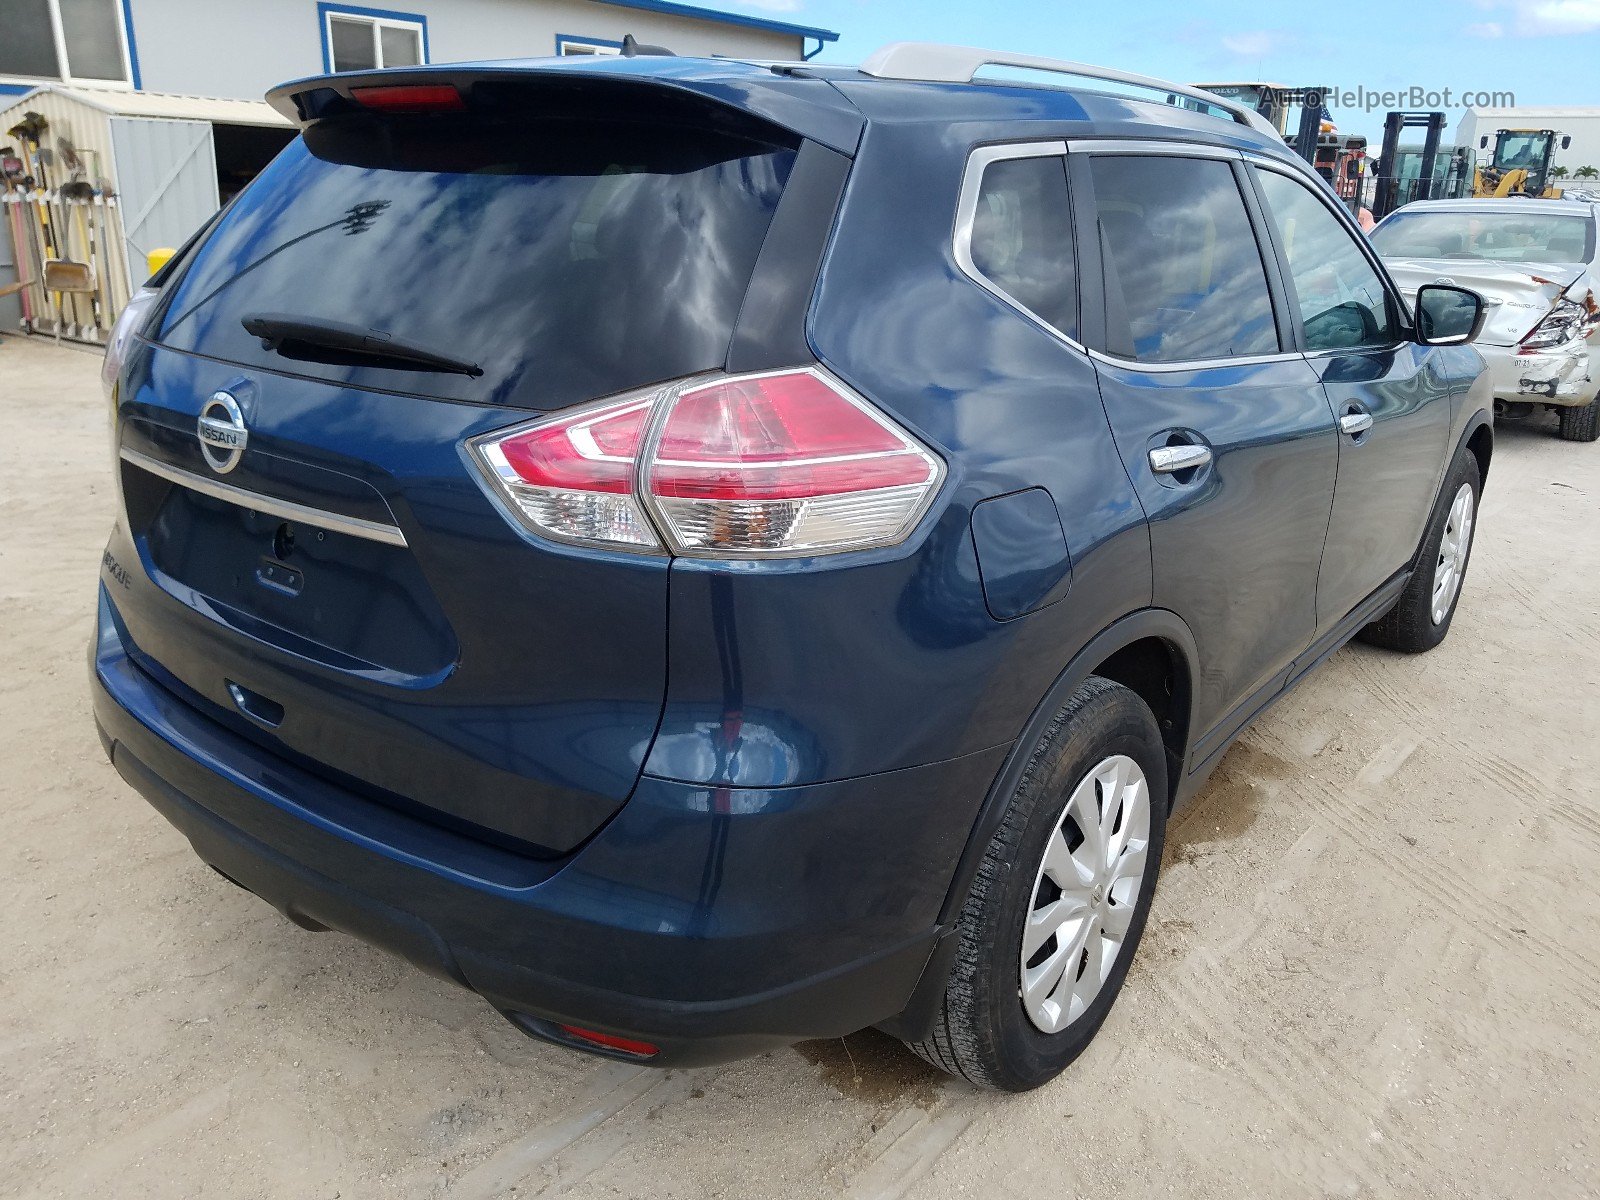 2016 Nissan Rogue S Blue vin: 5N1AT2MT4GC848656